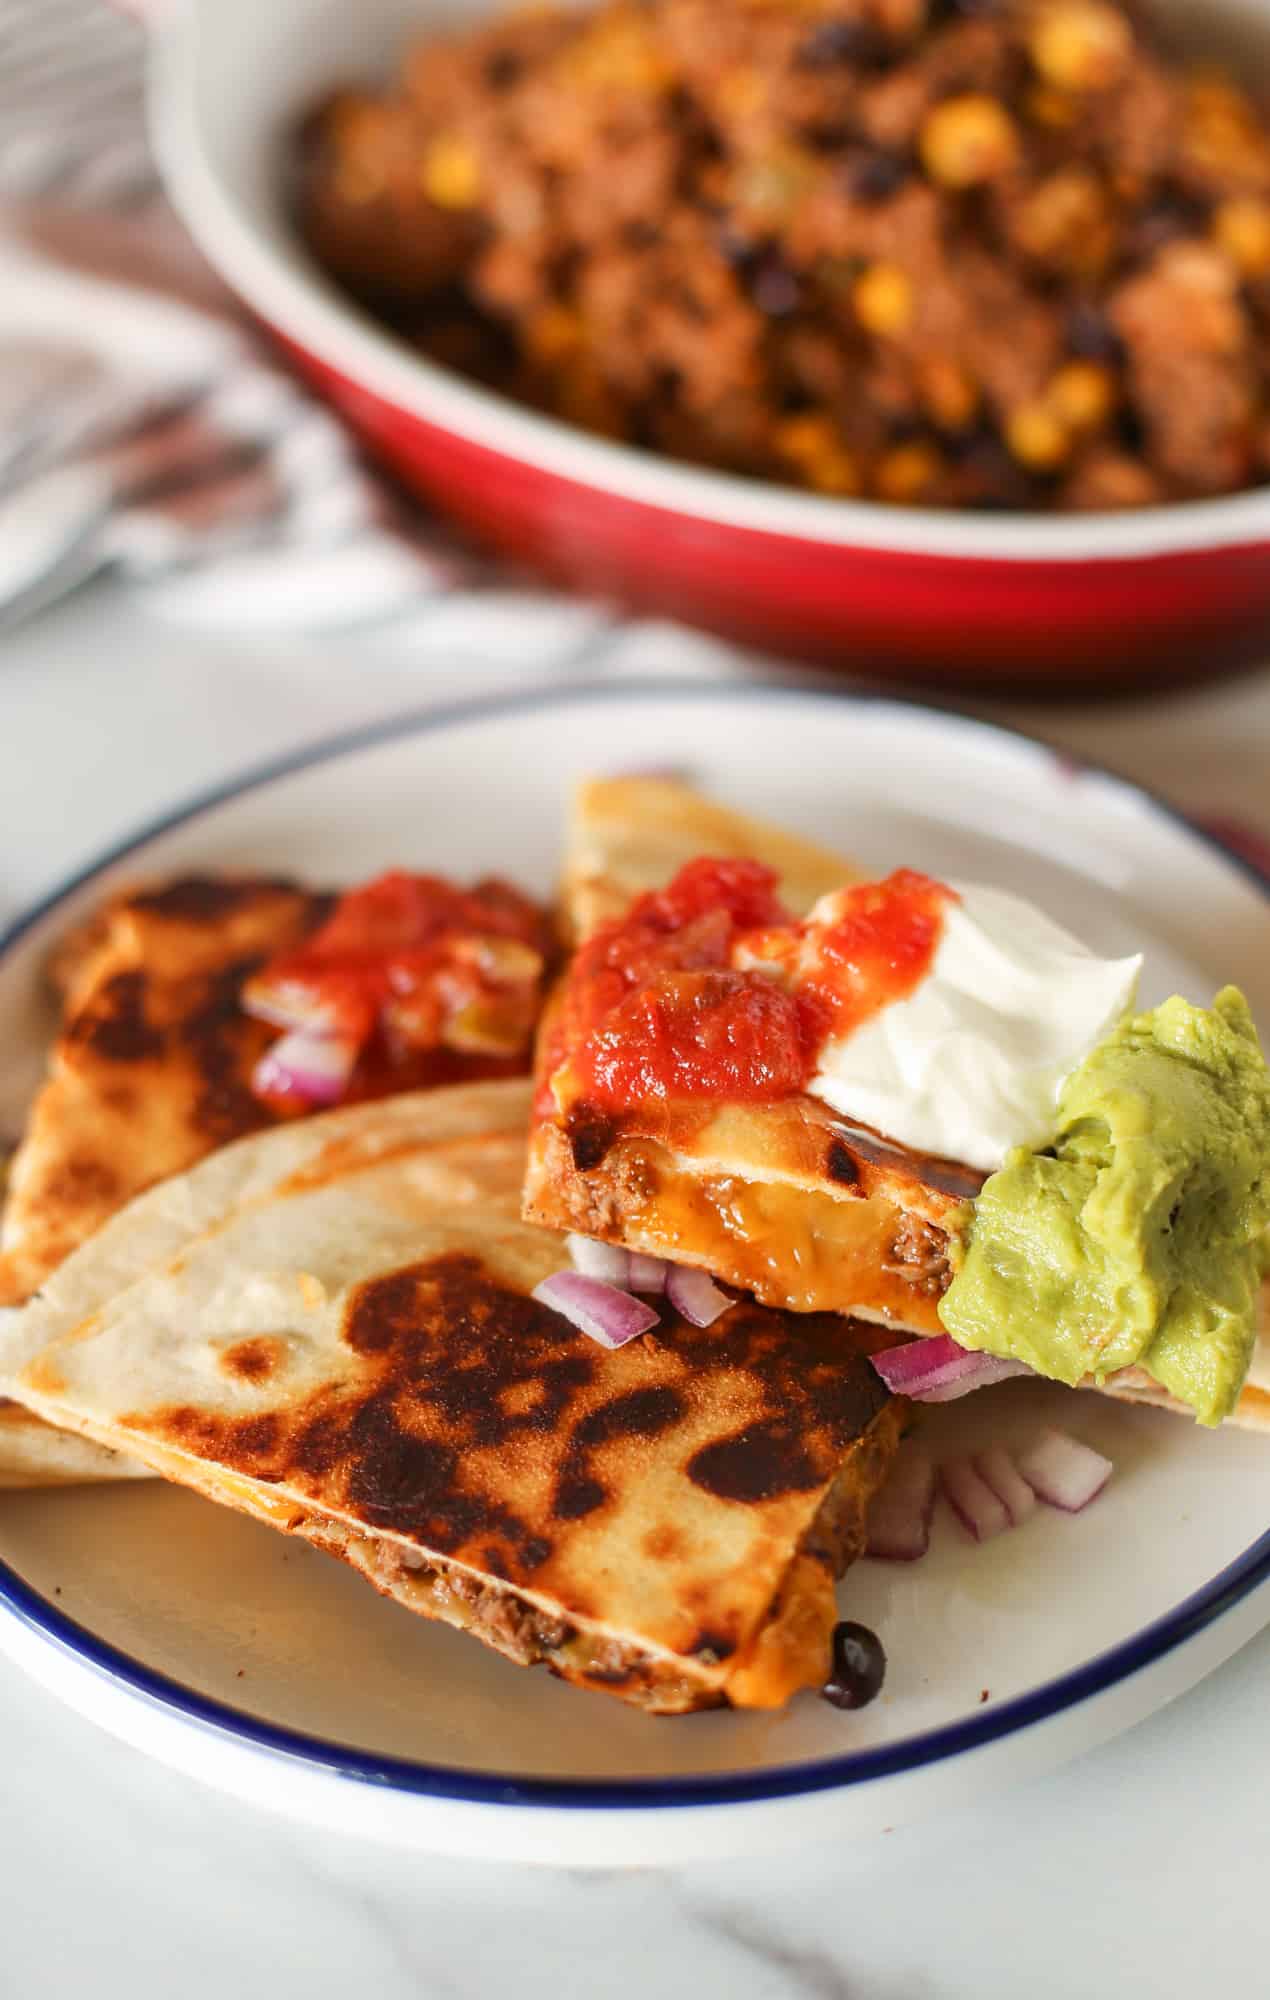 Beef quesadillas cut up on a plate with salsa, sour cream, and guacamole.